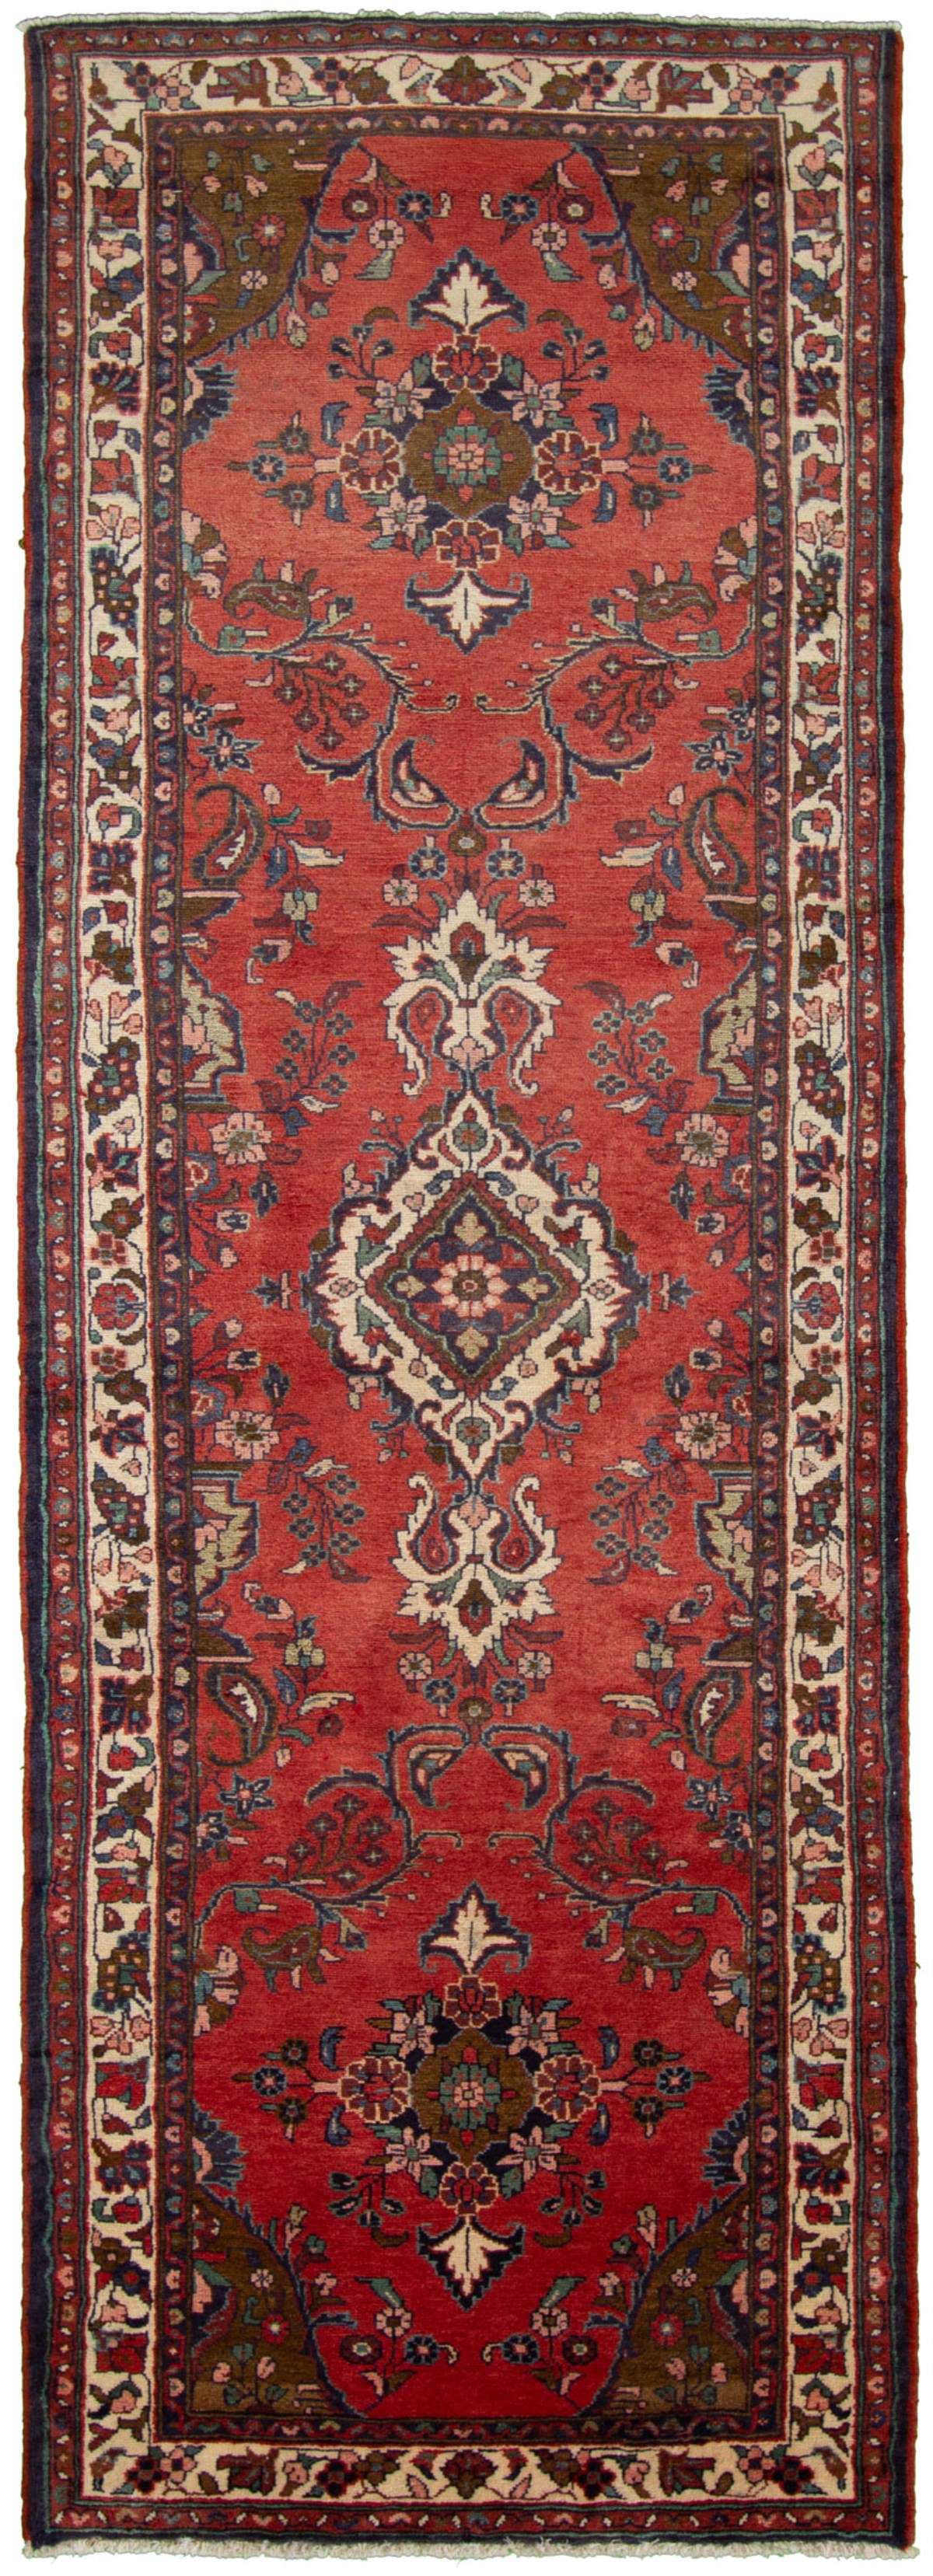 Hand-knotted Hamadan Red Wool Rug 3'9" x 10'9" Size: 3'9" x 10'9"  